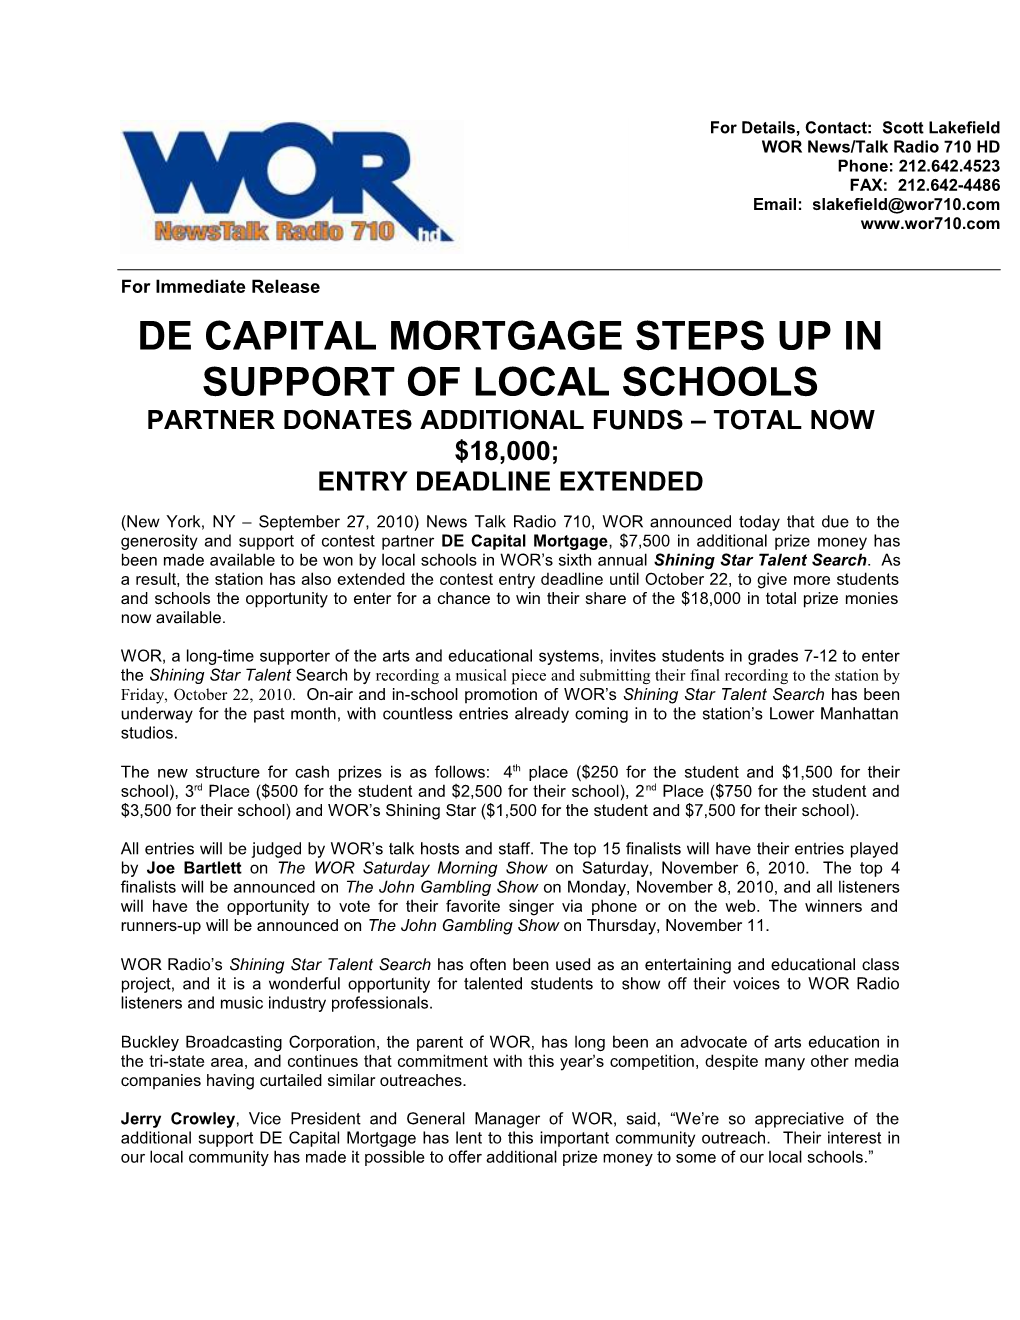 De Capital Mortgage Steps up in Support of Local Schools